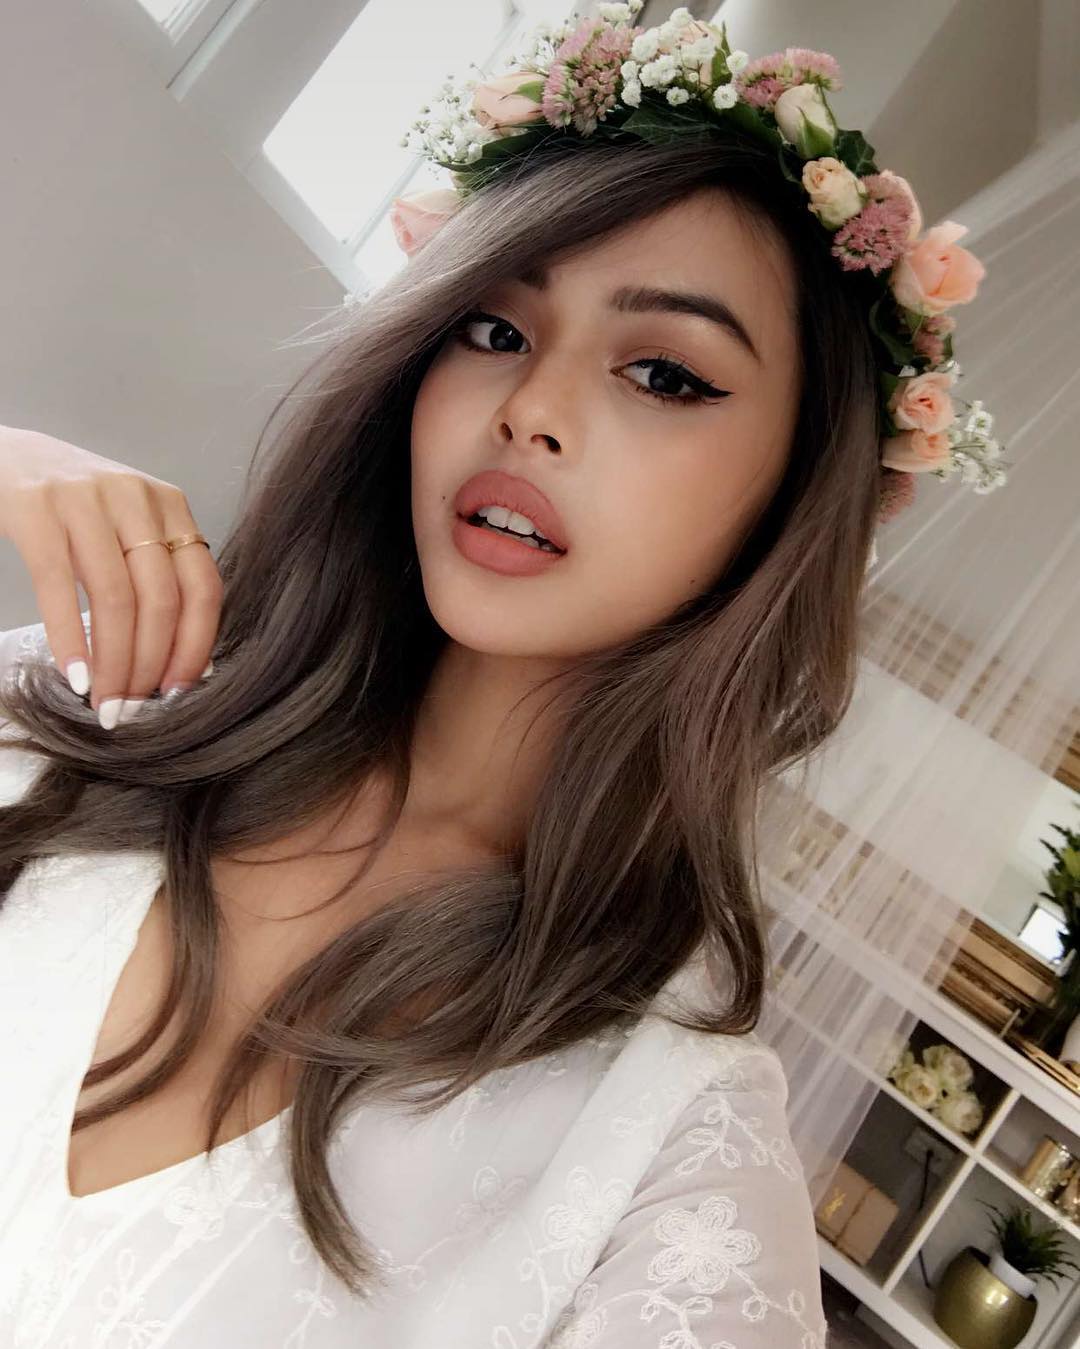 Image result for lily maymac